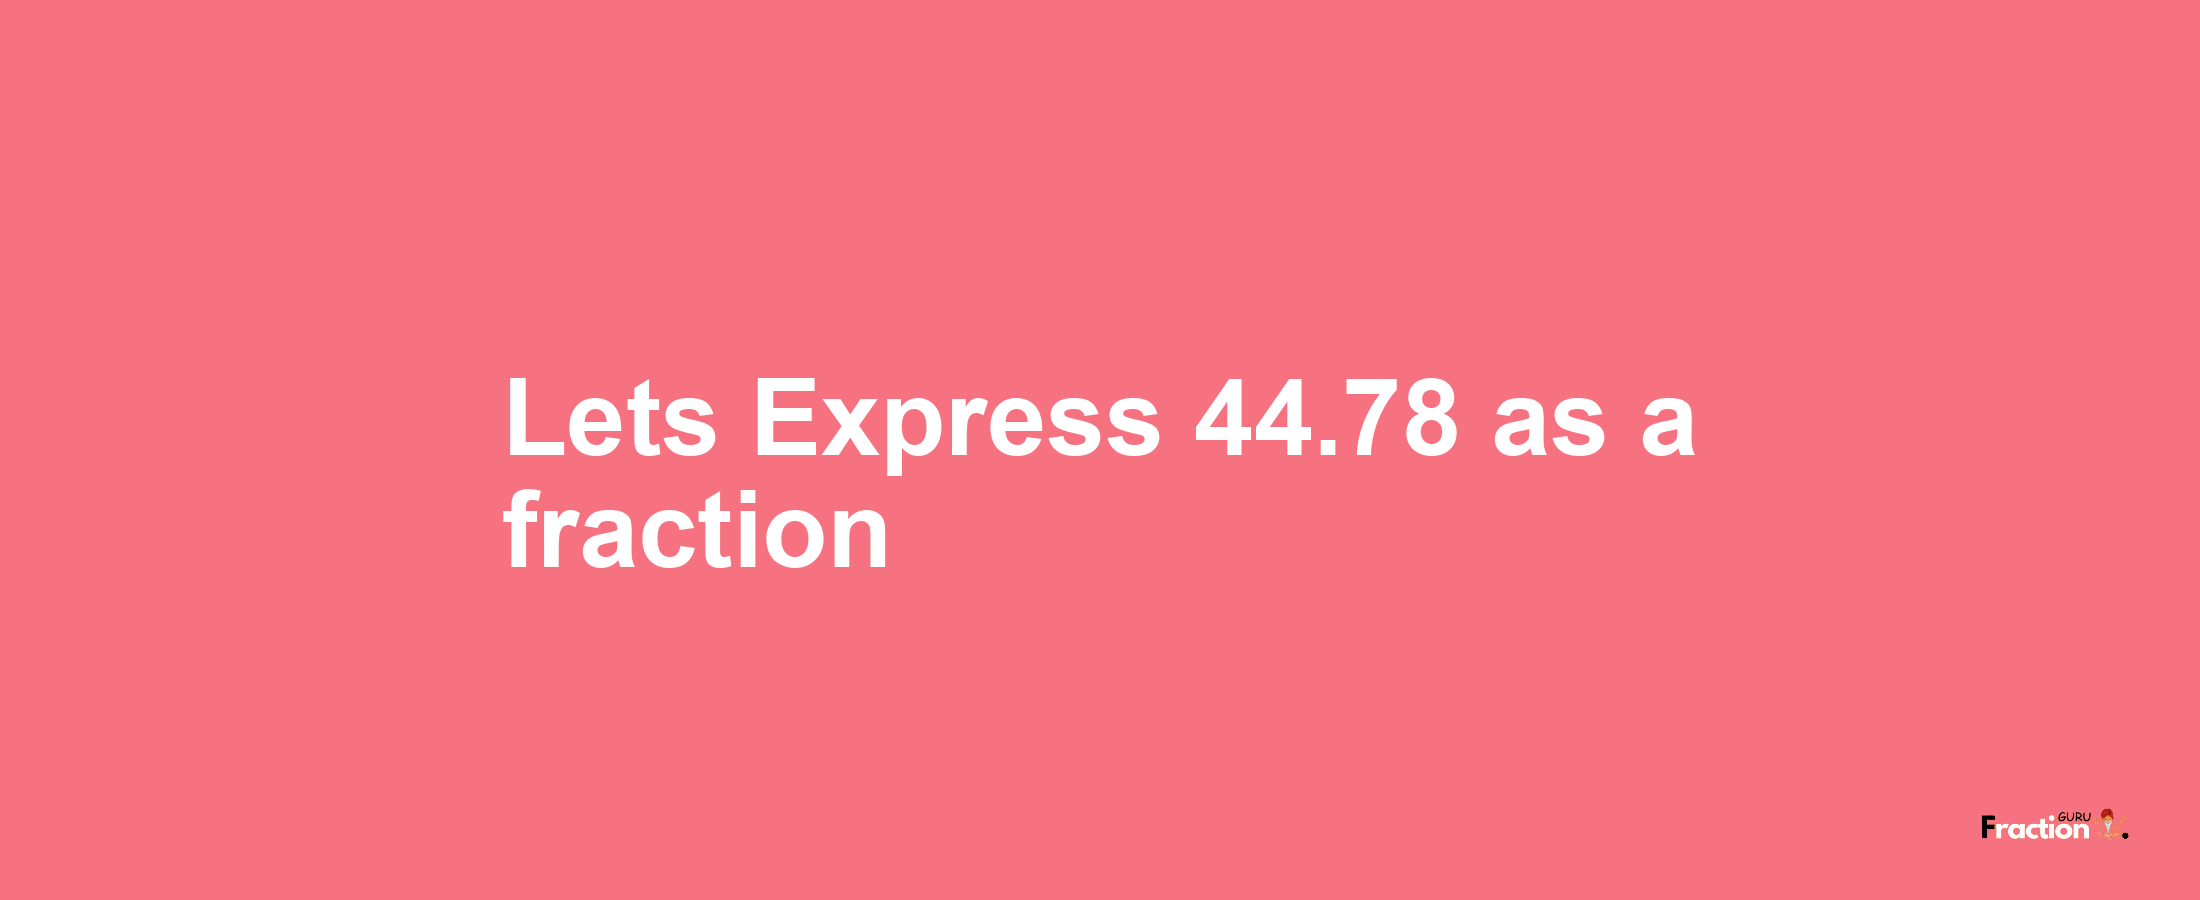 Lets Express 44.78 as afraction